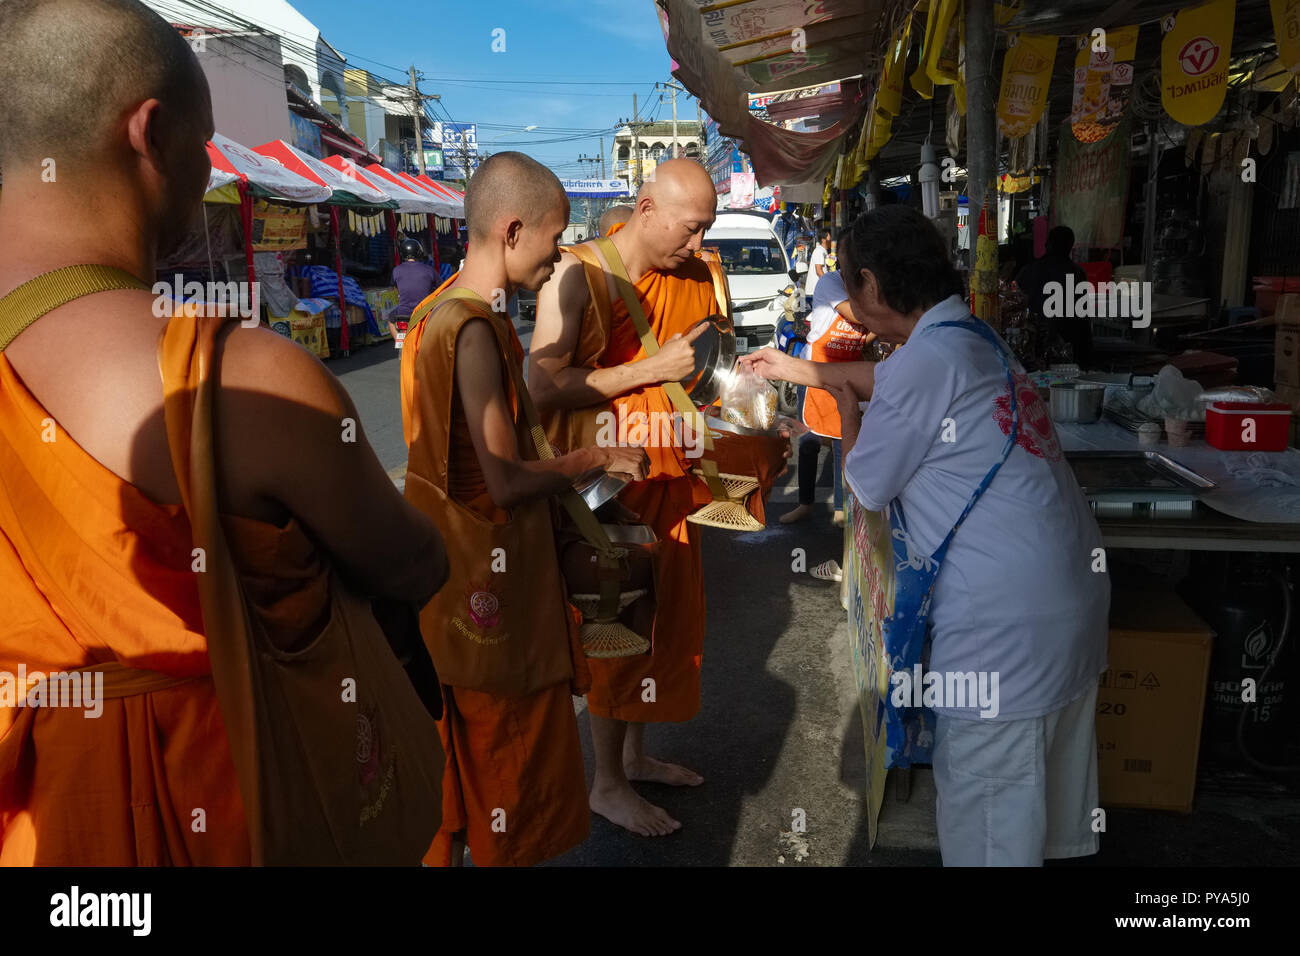 Buddhist Monks residing by the Big Buddha in Phuket, Thailand, on their early morning alms round in a market in Ranong Rd., Phuket Town Stock Photo